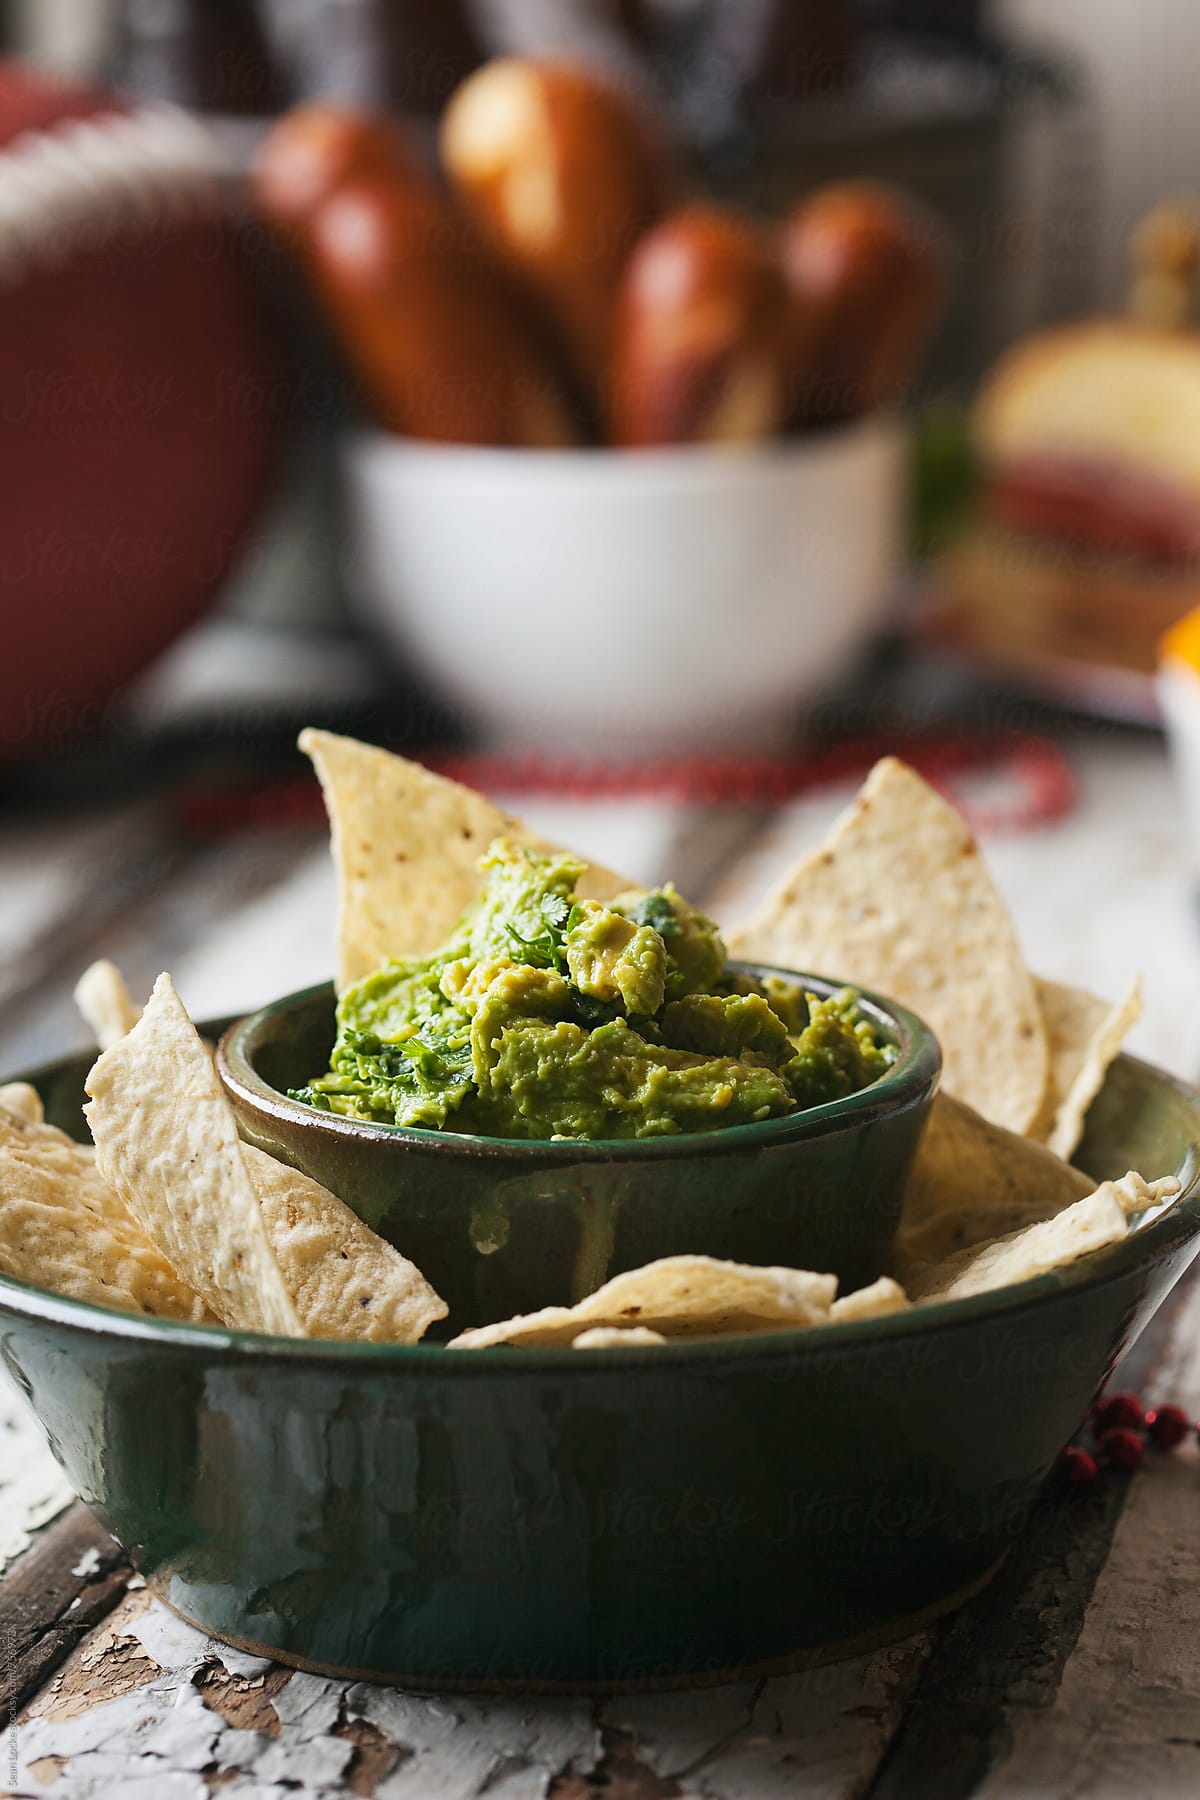 Football: Bowl Of Guacamole With Other Snacks